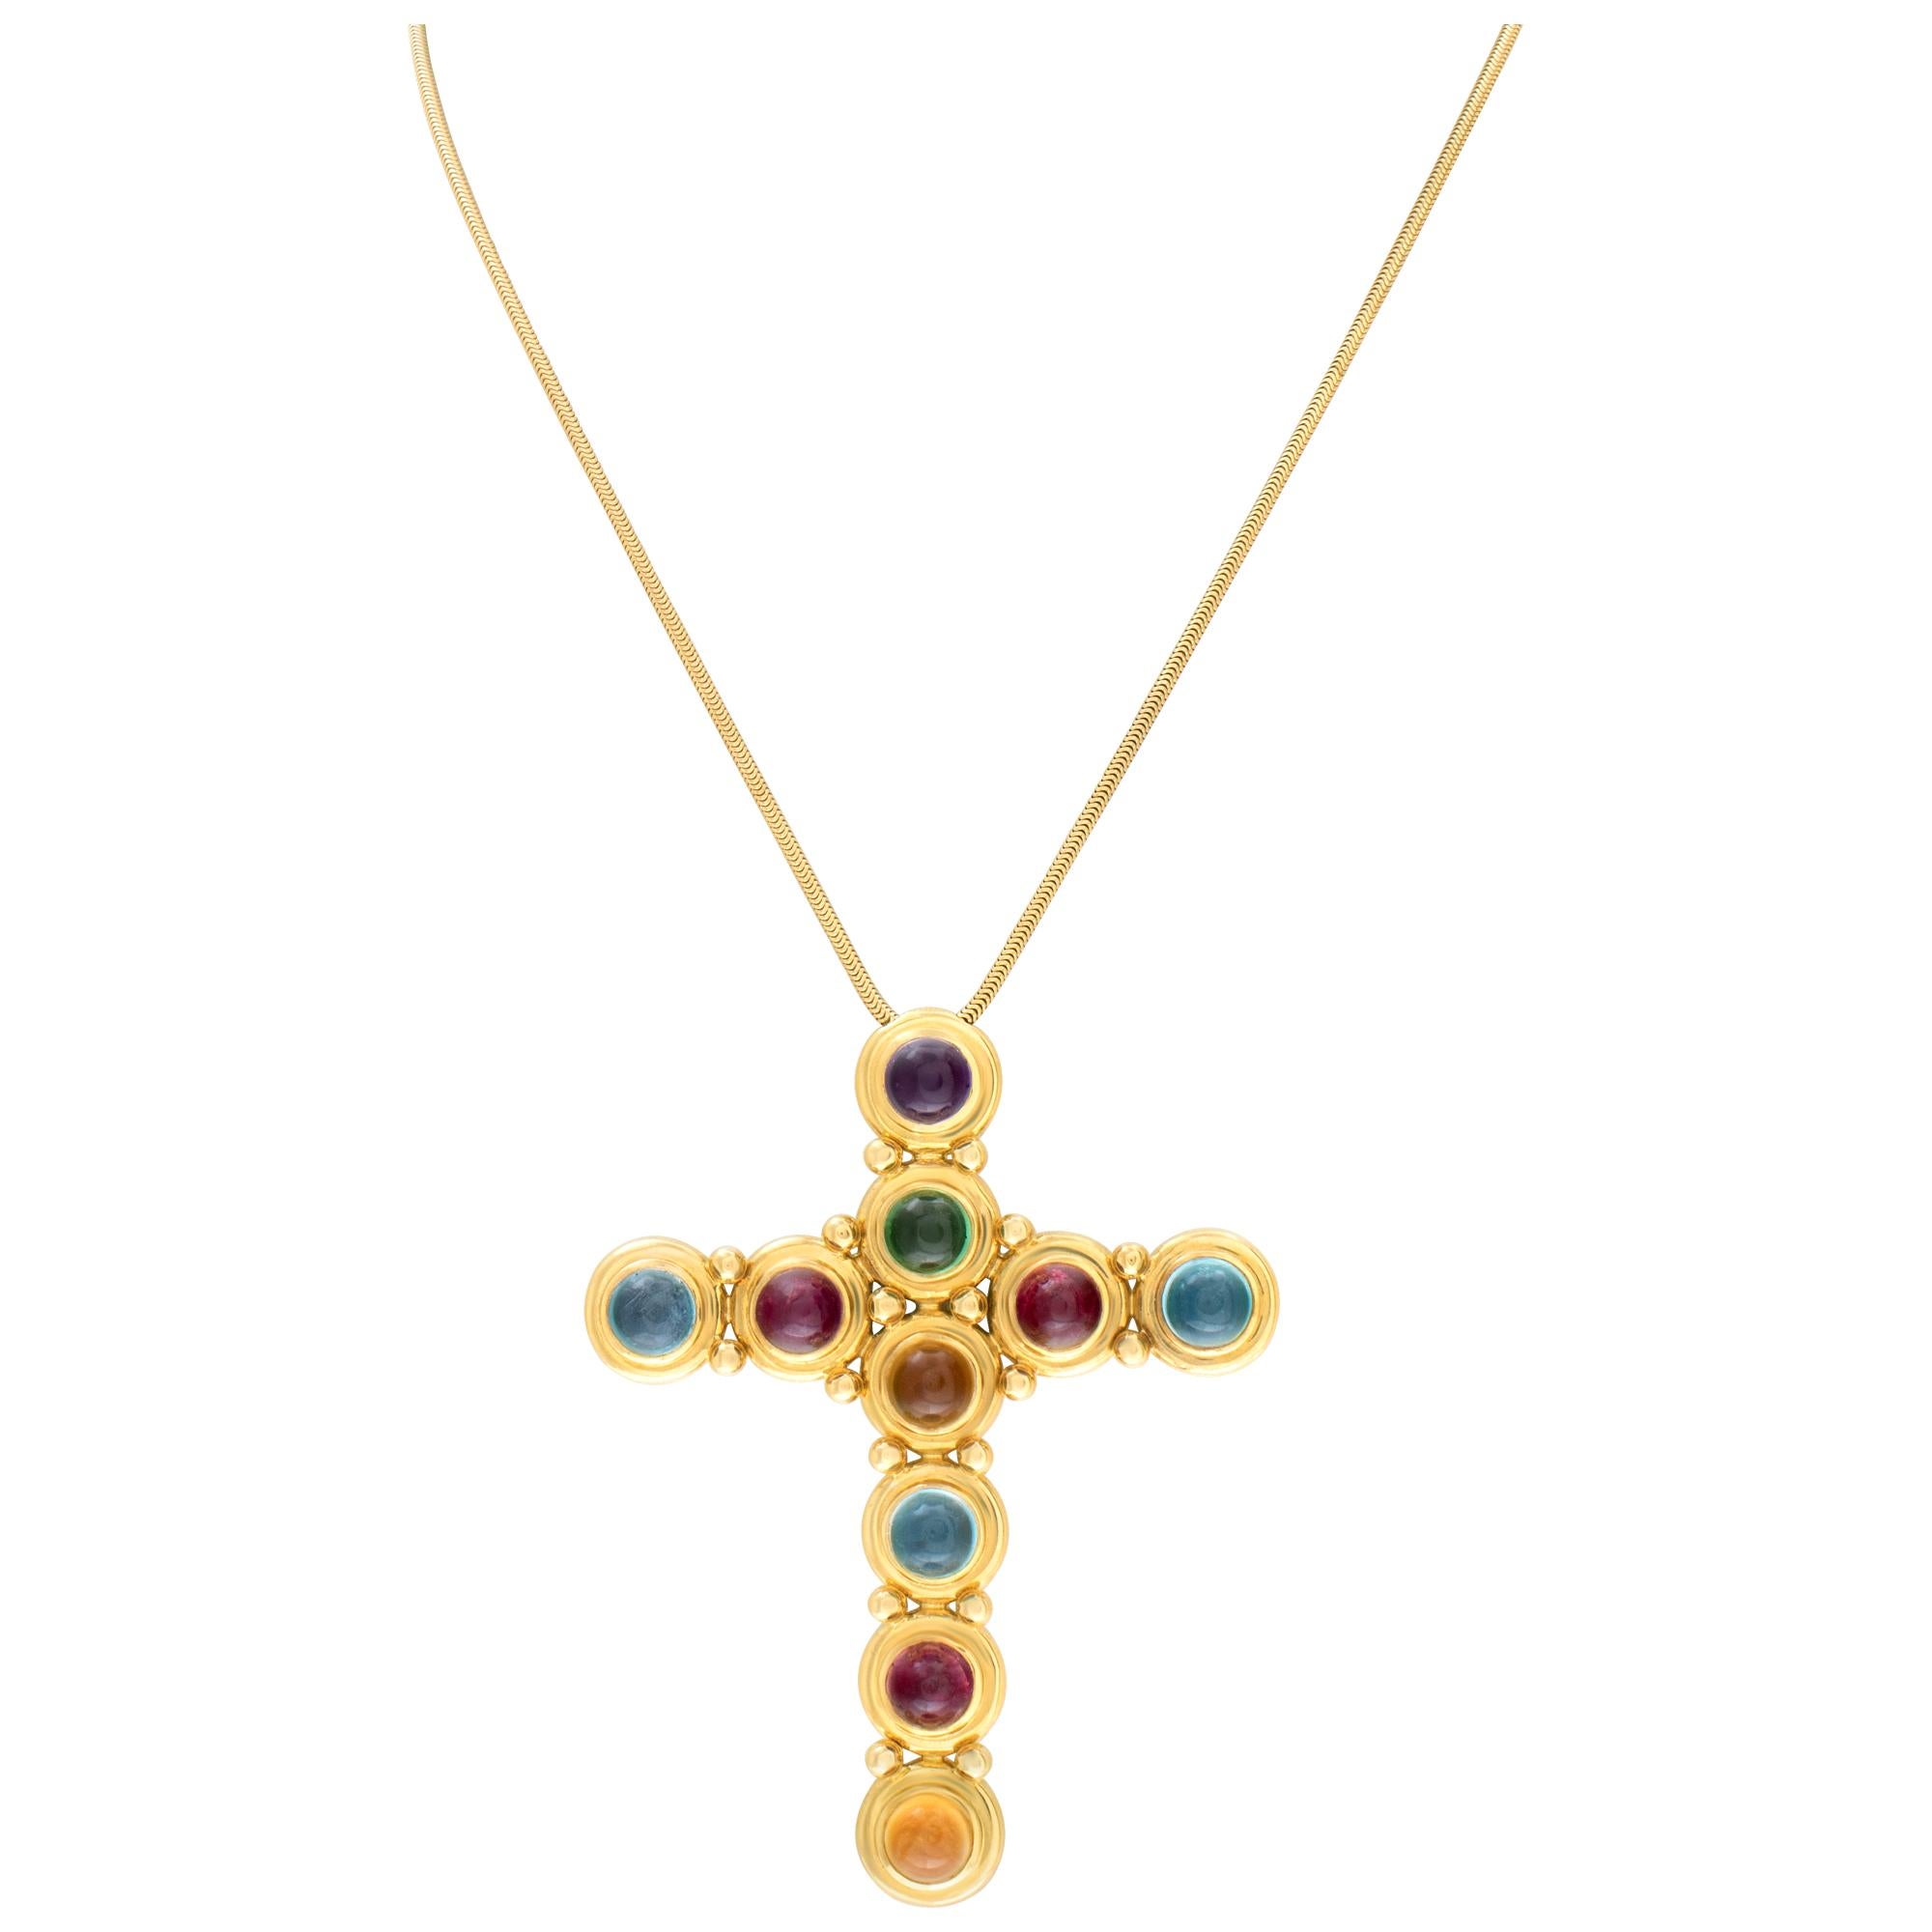 Tiffany & Co Paloma Picasso gemstone cross in 18k gold with aquamarine, blue topaz, amethyst, citrine & tourmalines. Cross is 78 mm long and 62 mm wide. Chain is 18